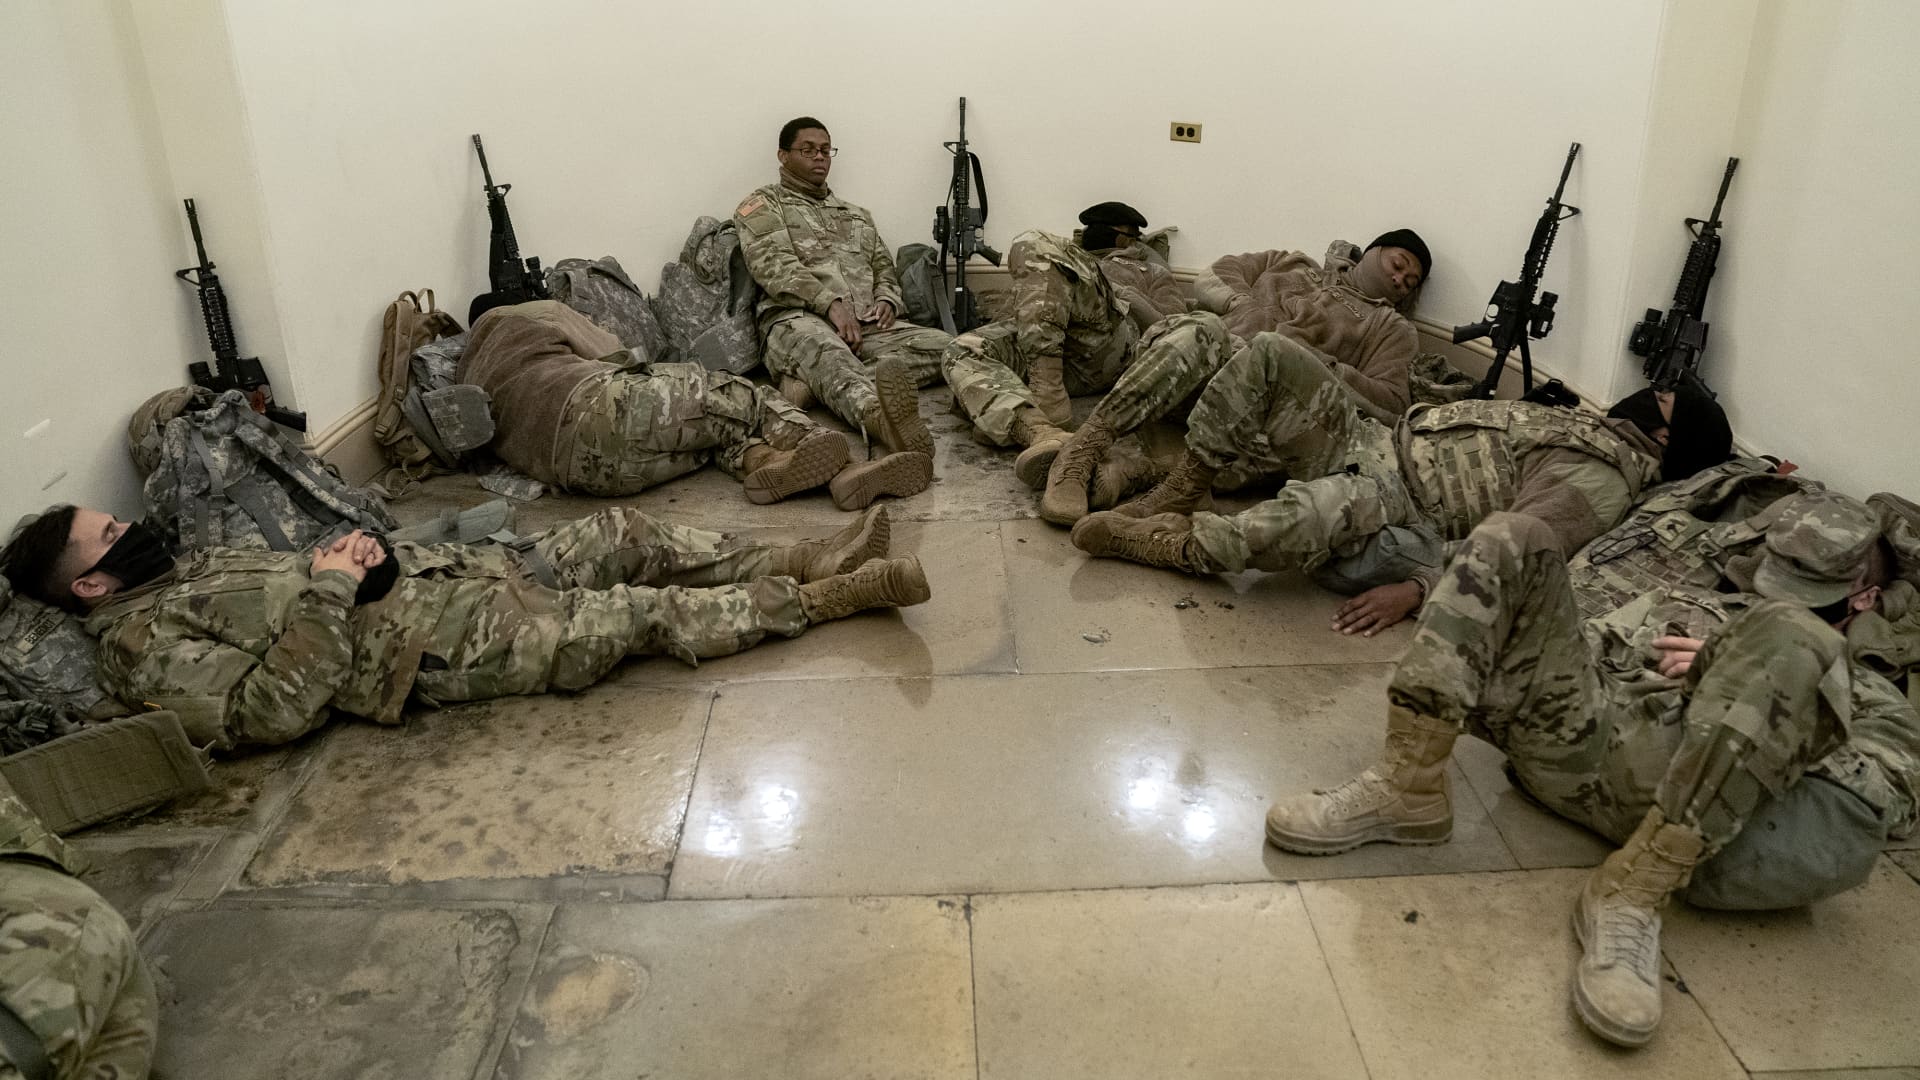 Members of the National Guard rest in the U.S. Capitol on January 13, 2021 in Washington, DC.